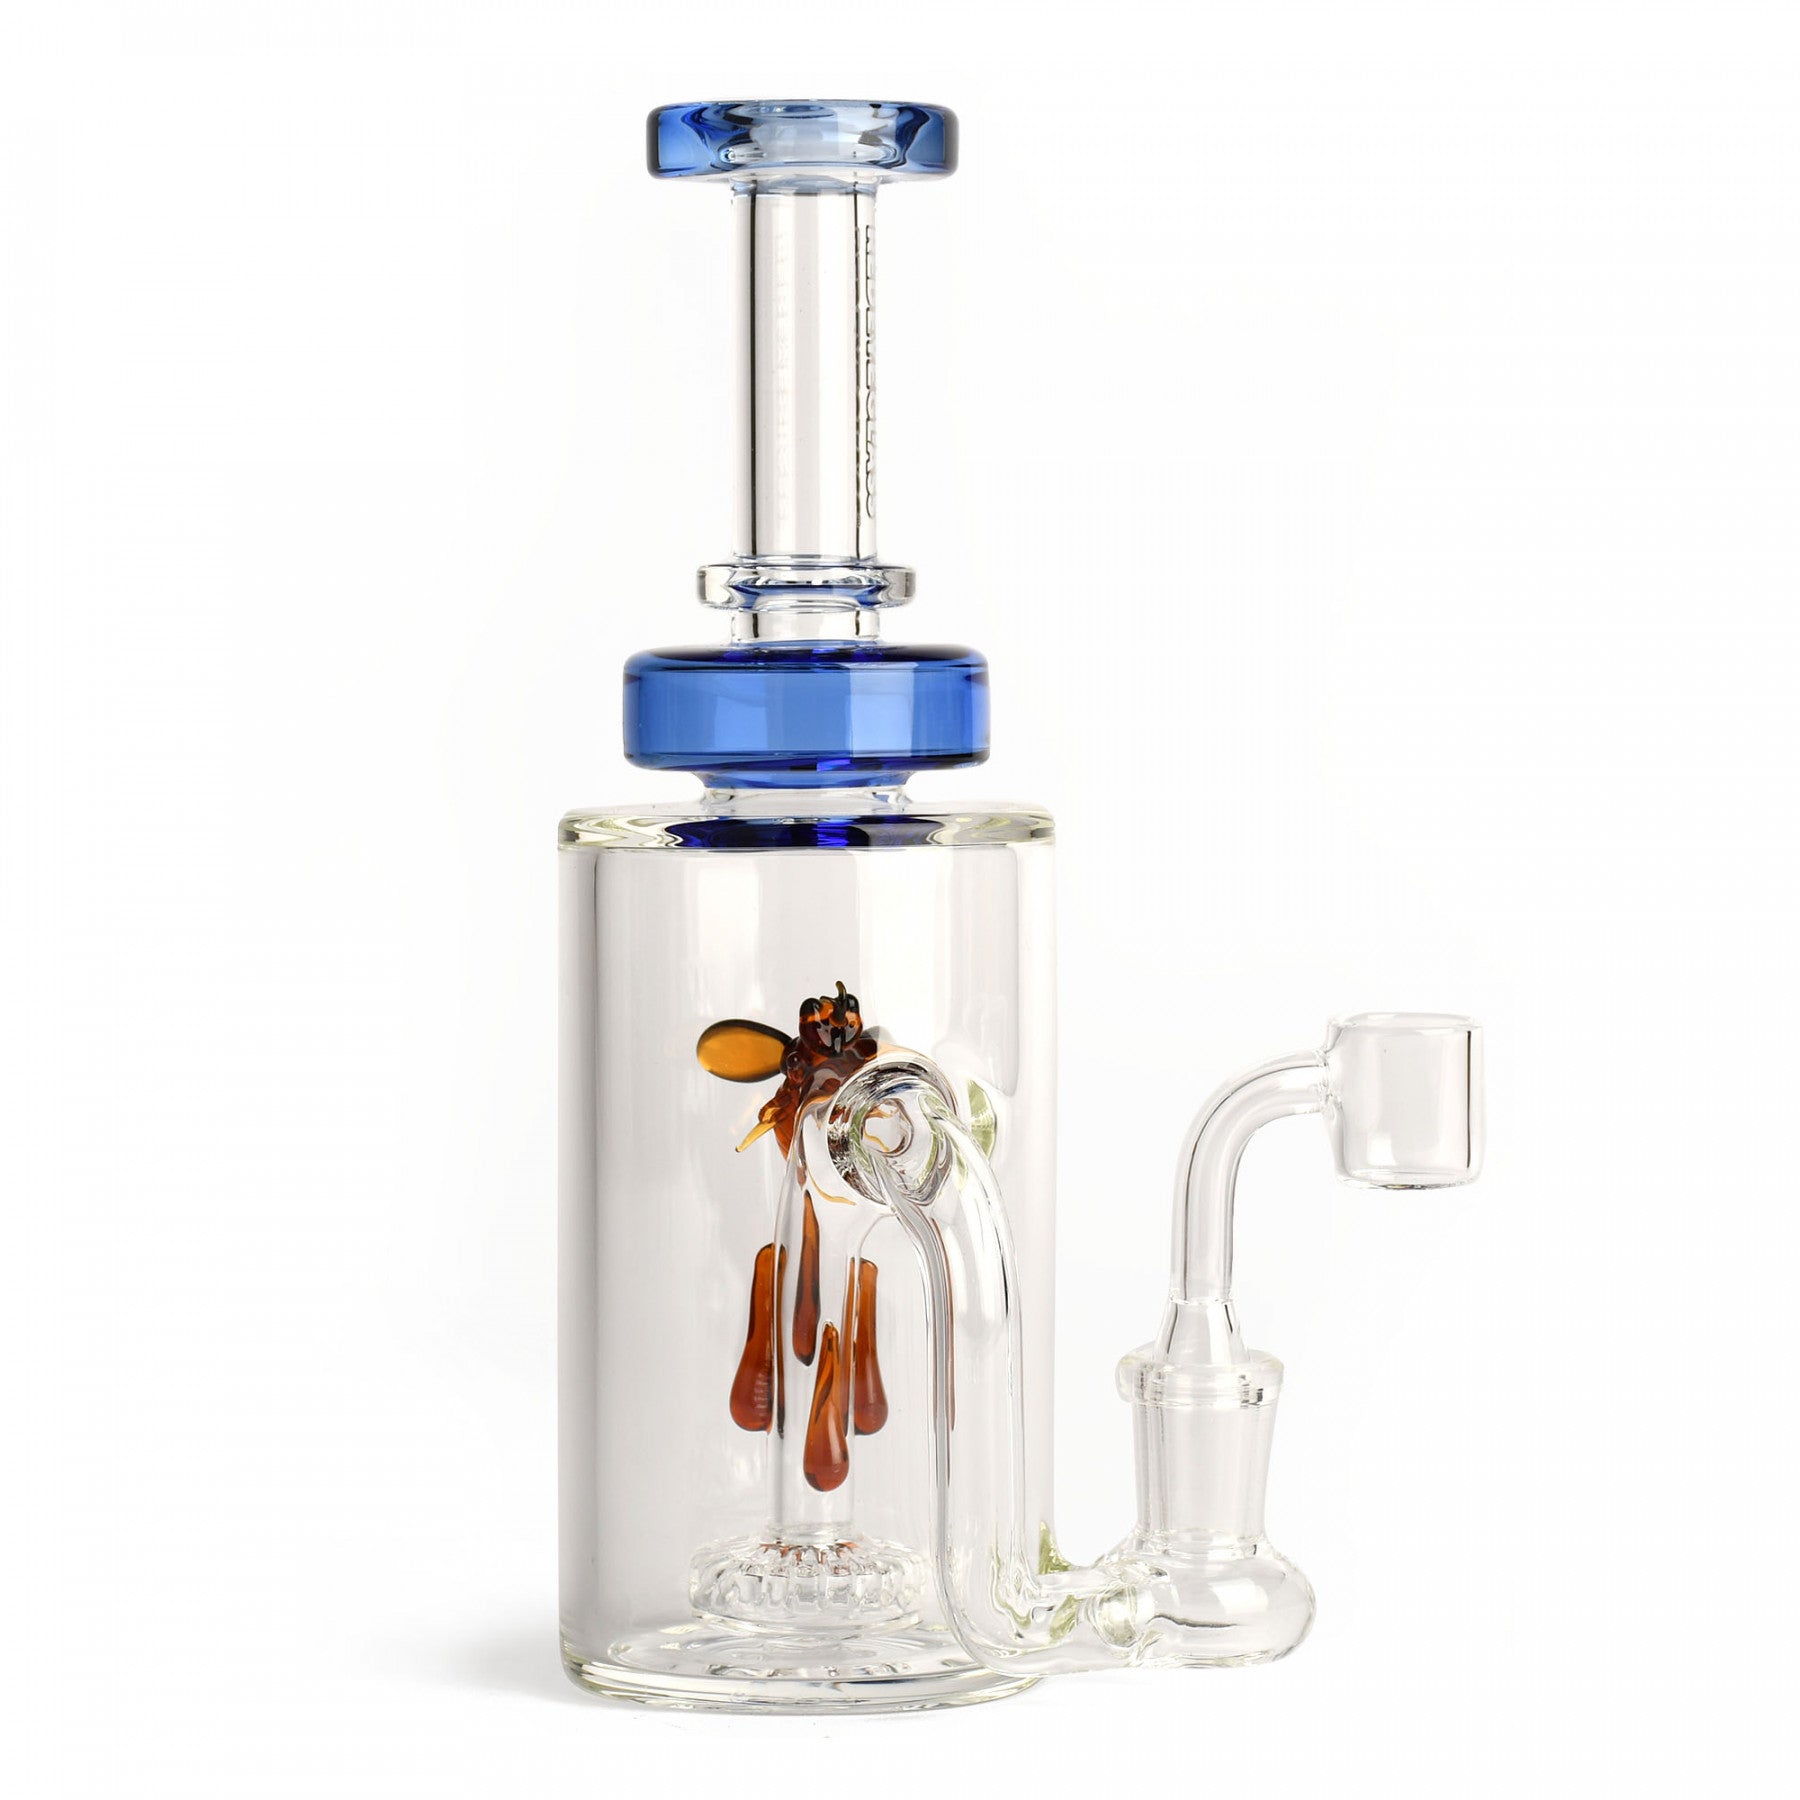 Redeye Glass 8.5" Apiary Concentrate Rig